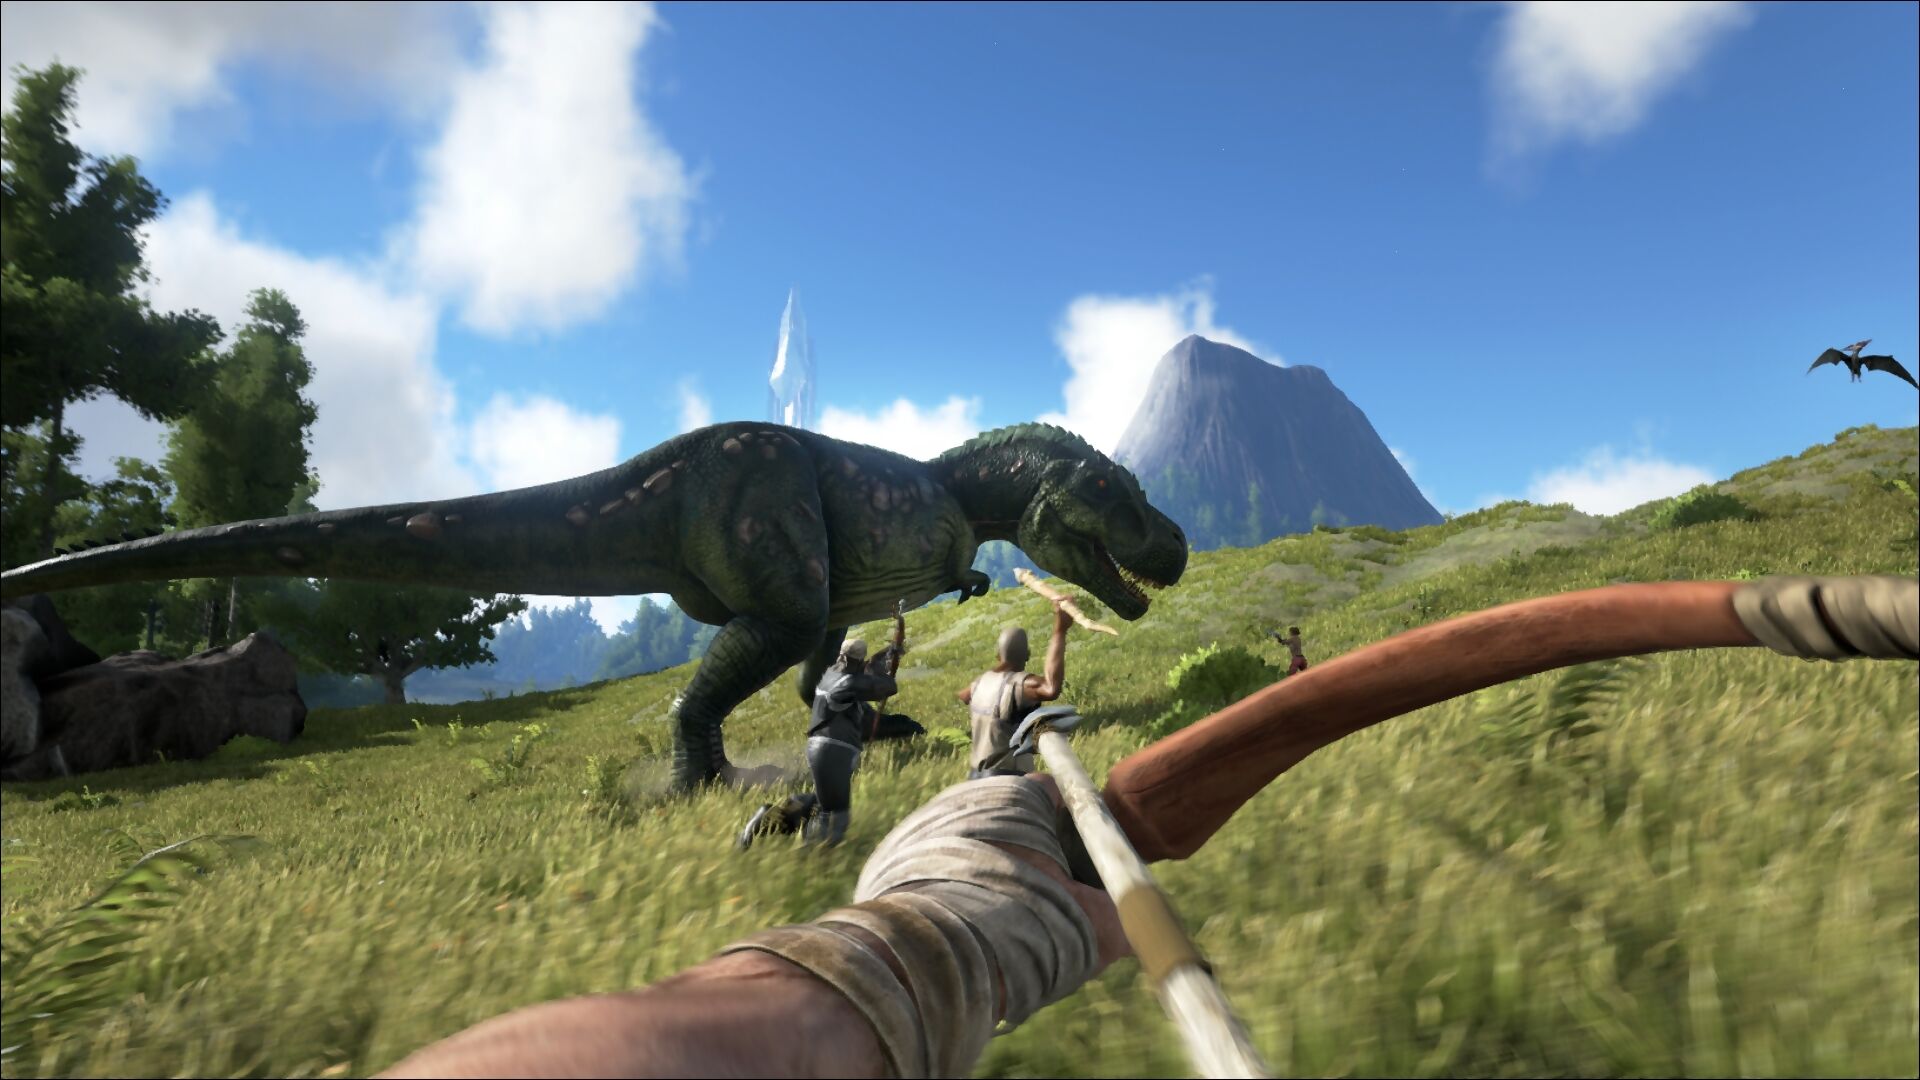 Ark: Survival Ascended delayed to October, remastered DLC no longer coming  at launch